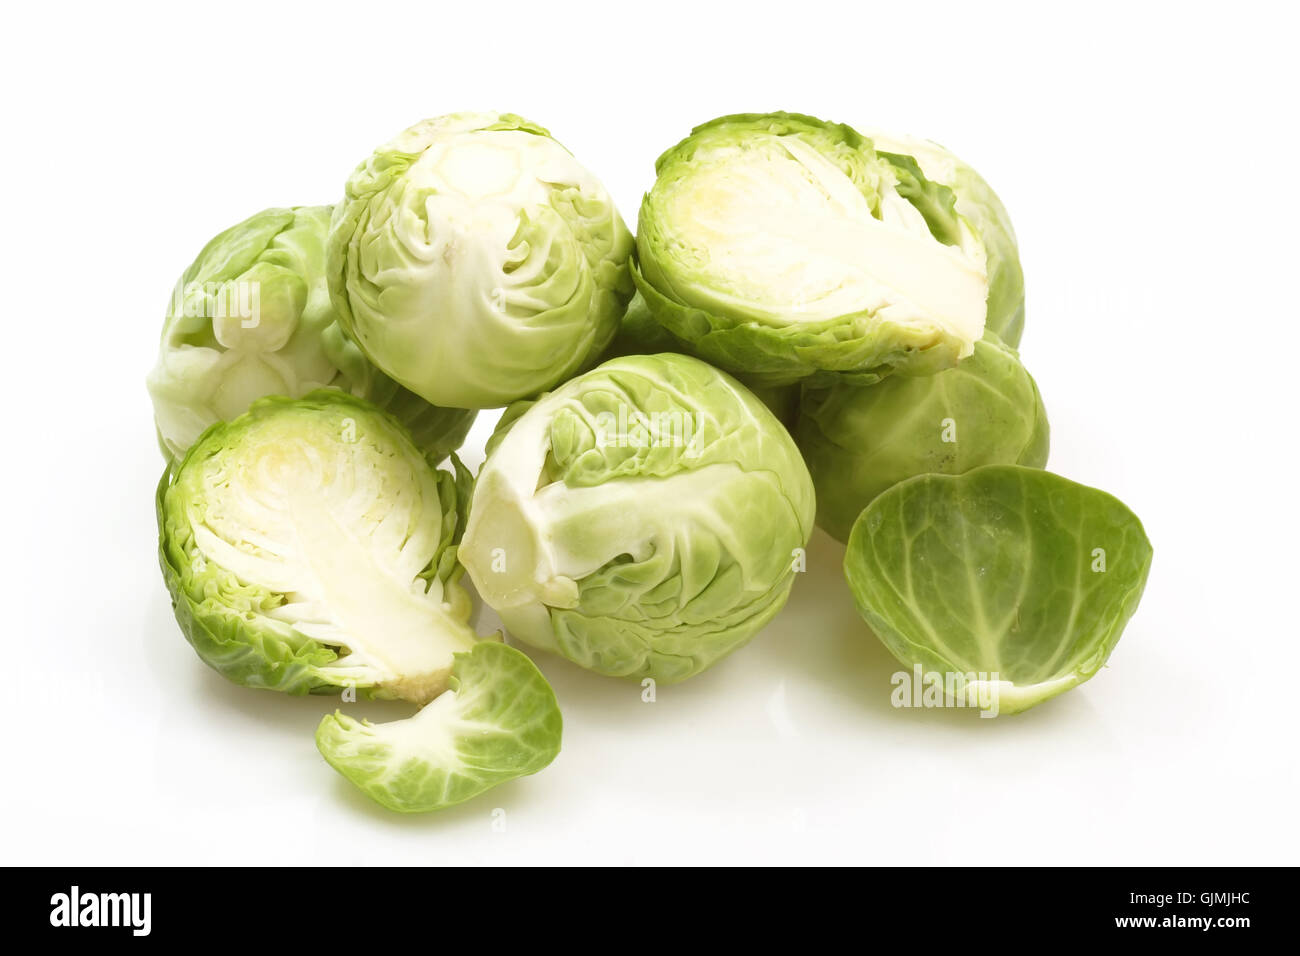 vegetable cabbage brussels sprouts Stock Photo